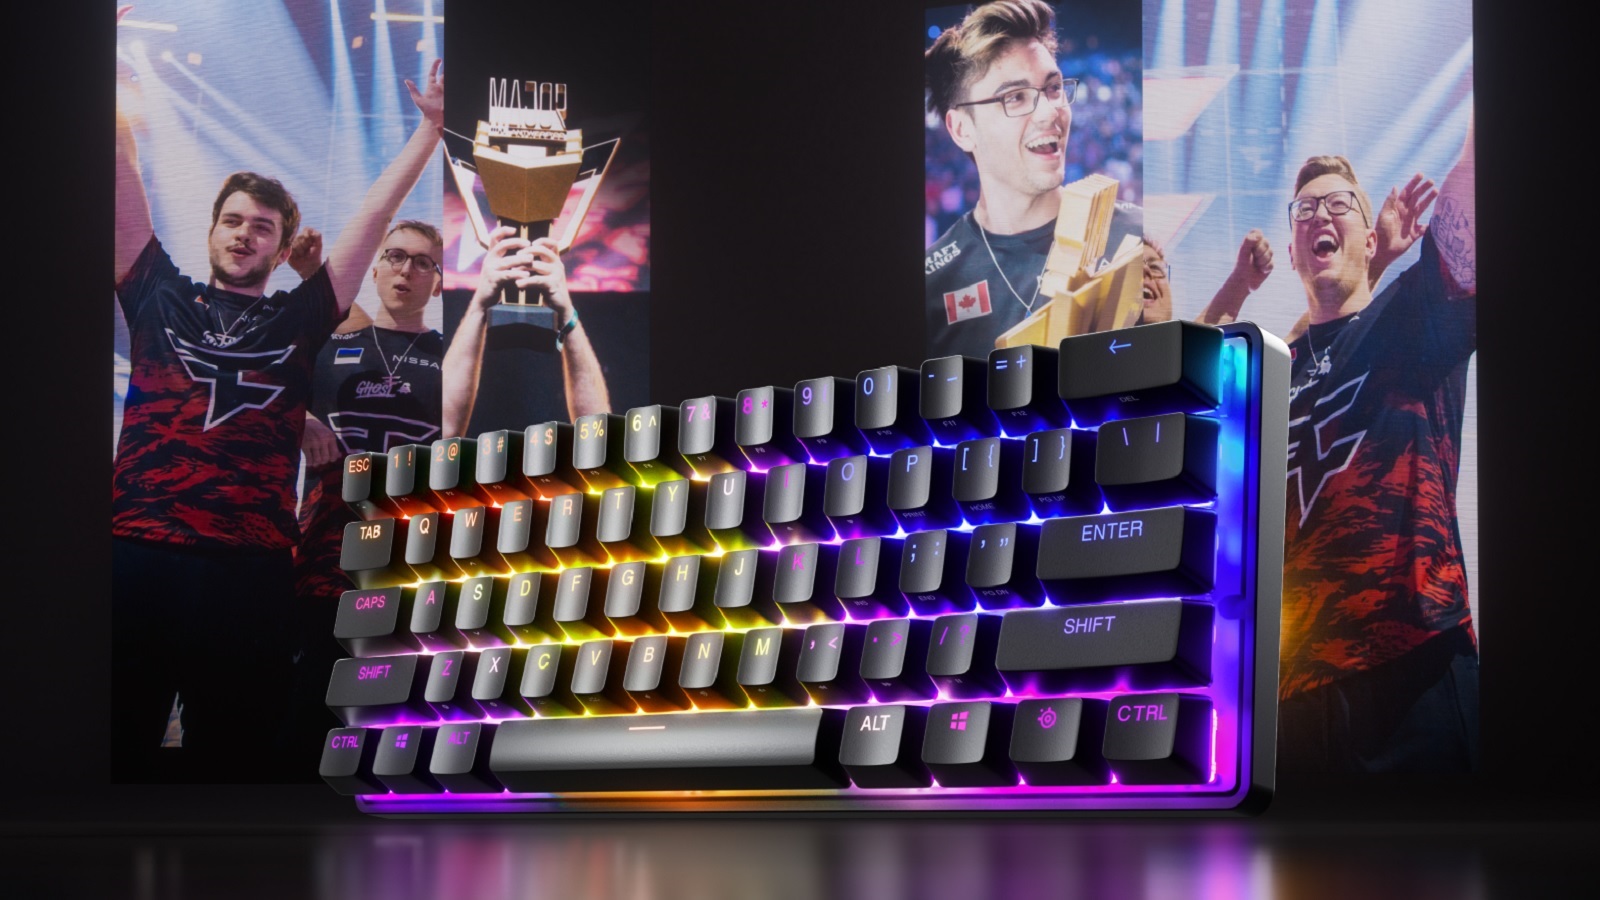 SteelSeries upgrades its Apex Pro keyboard line with ‘Rapid Trigger’ mode